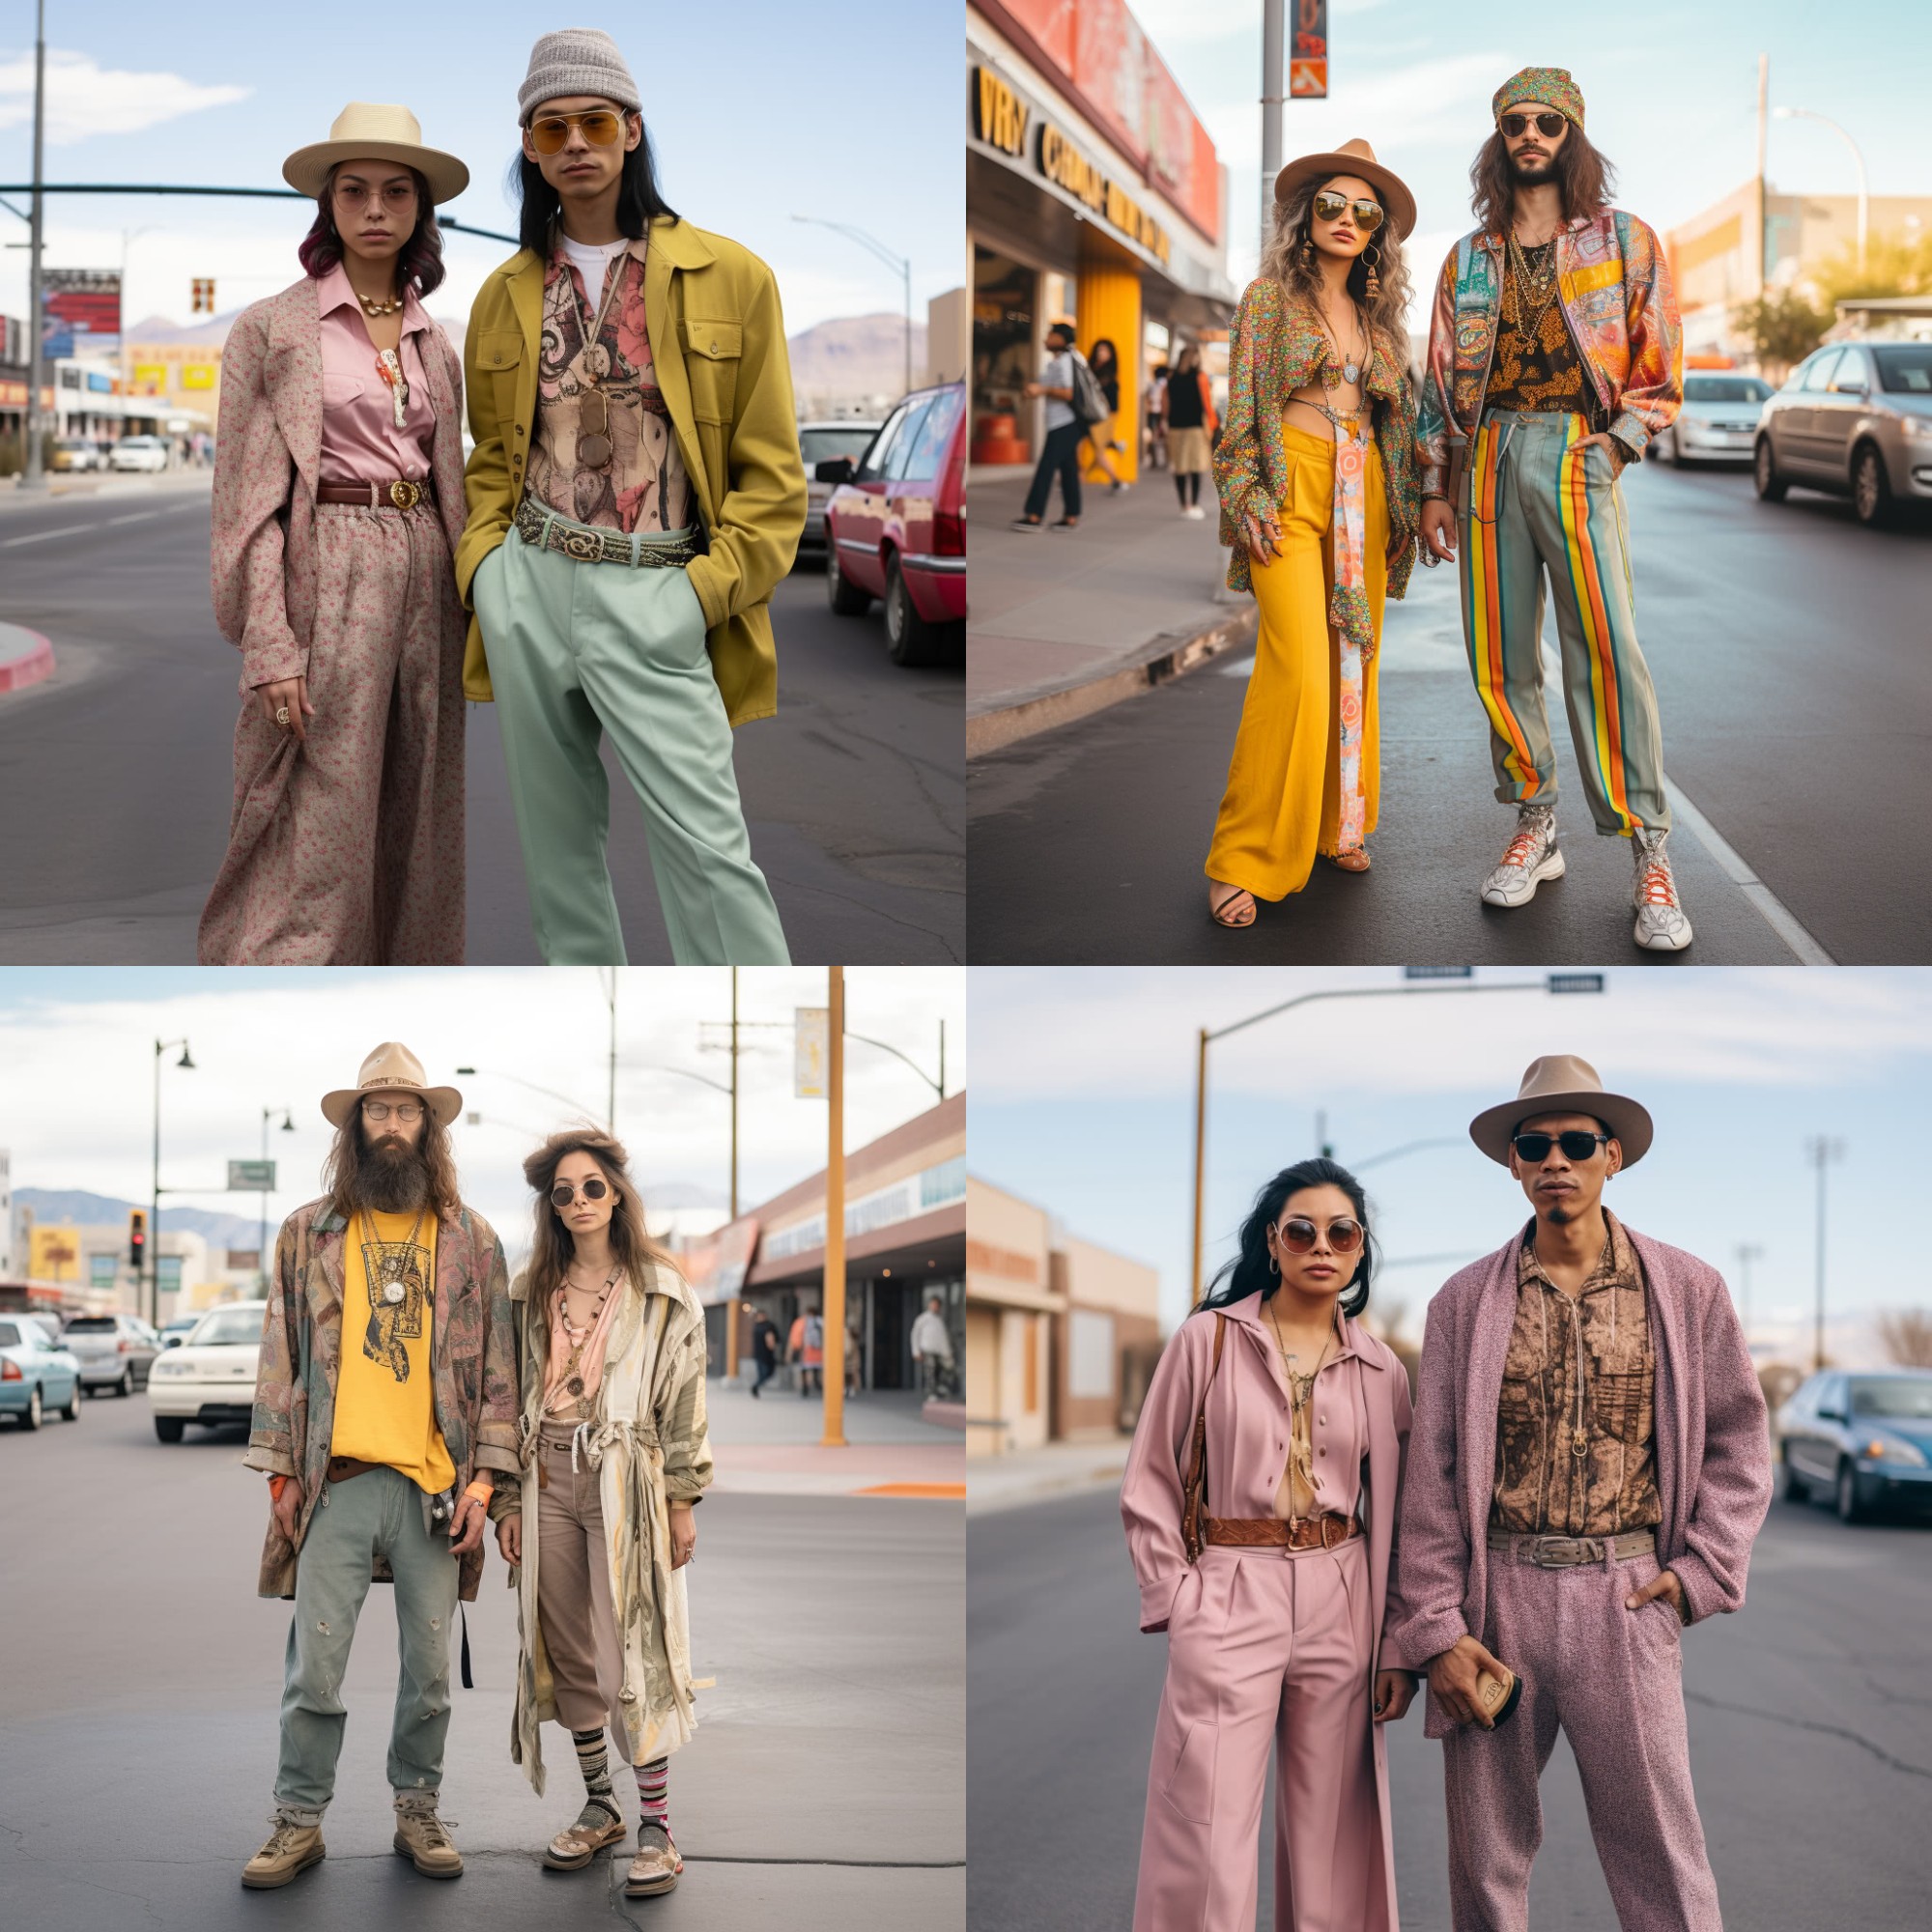 AI curated images of the average fashion style of individuals in Nevada